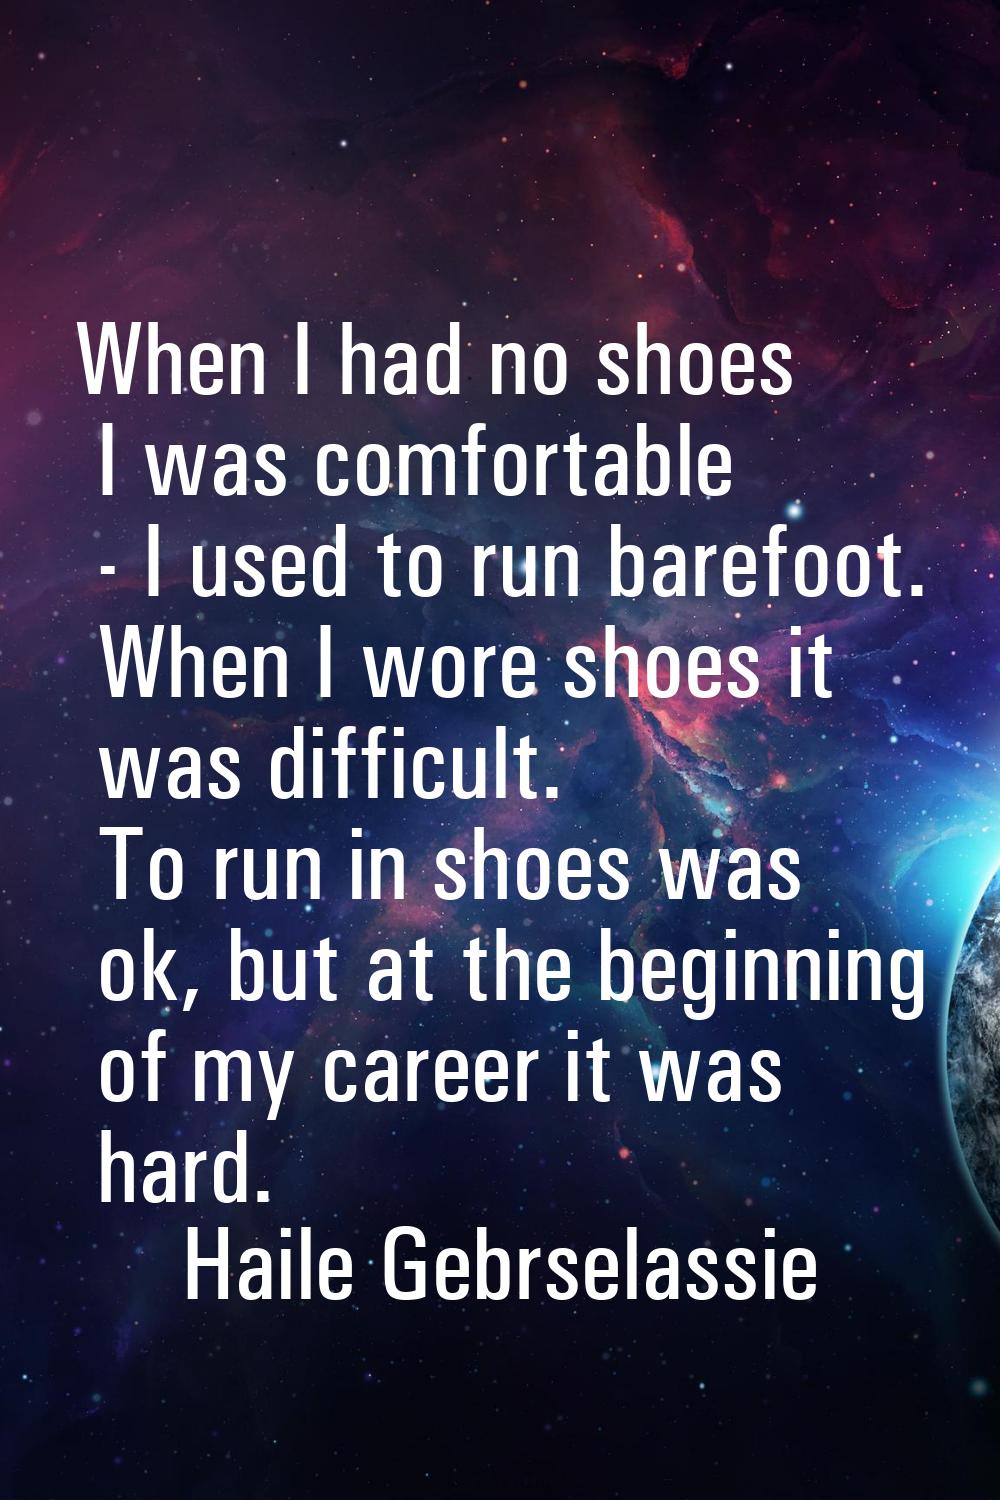 When I had no shoes I was comfortable - I used to run barefoot. When I wore shoes it was difficult.